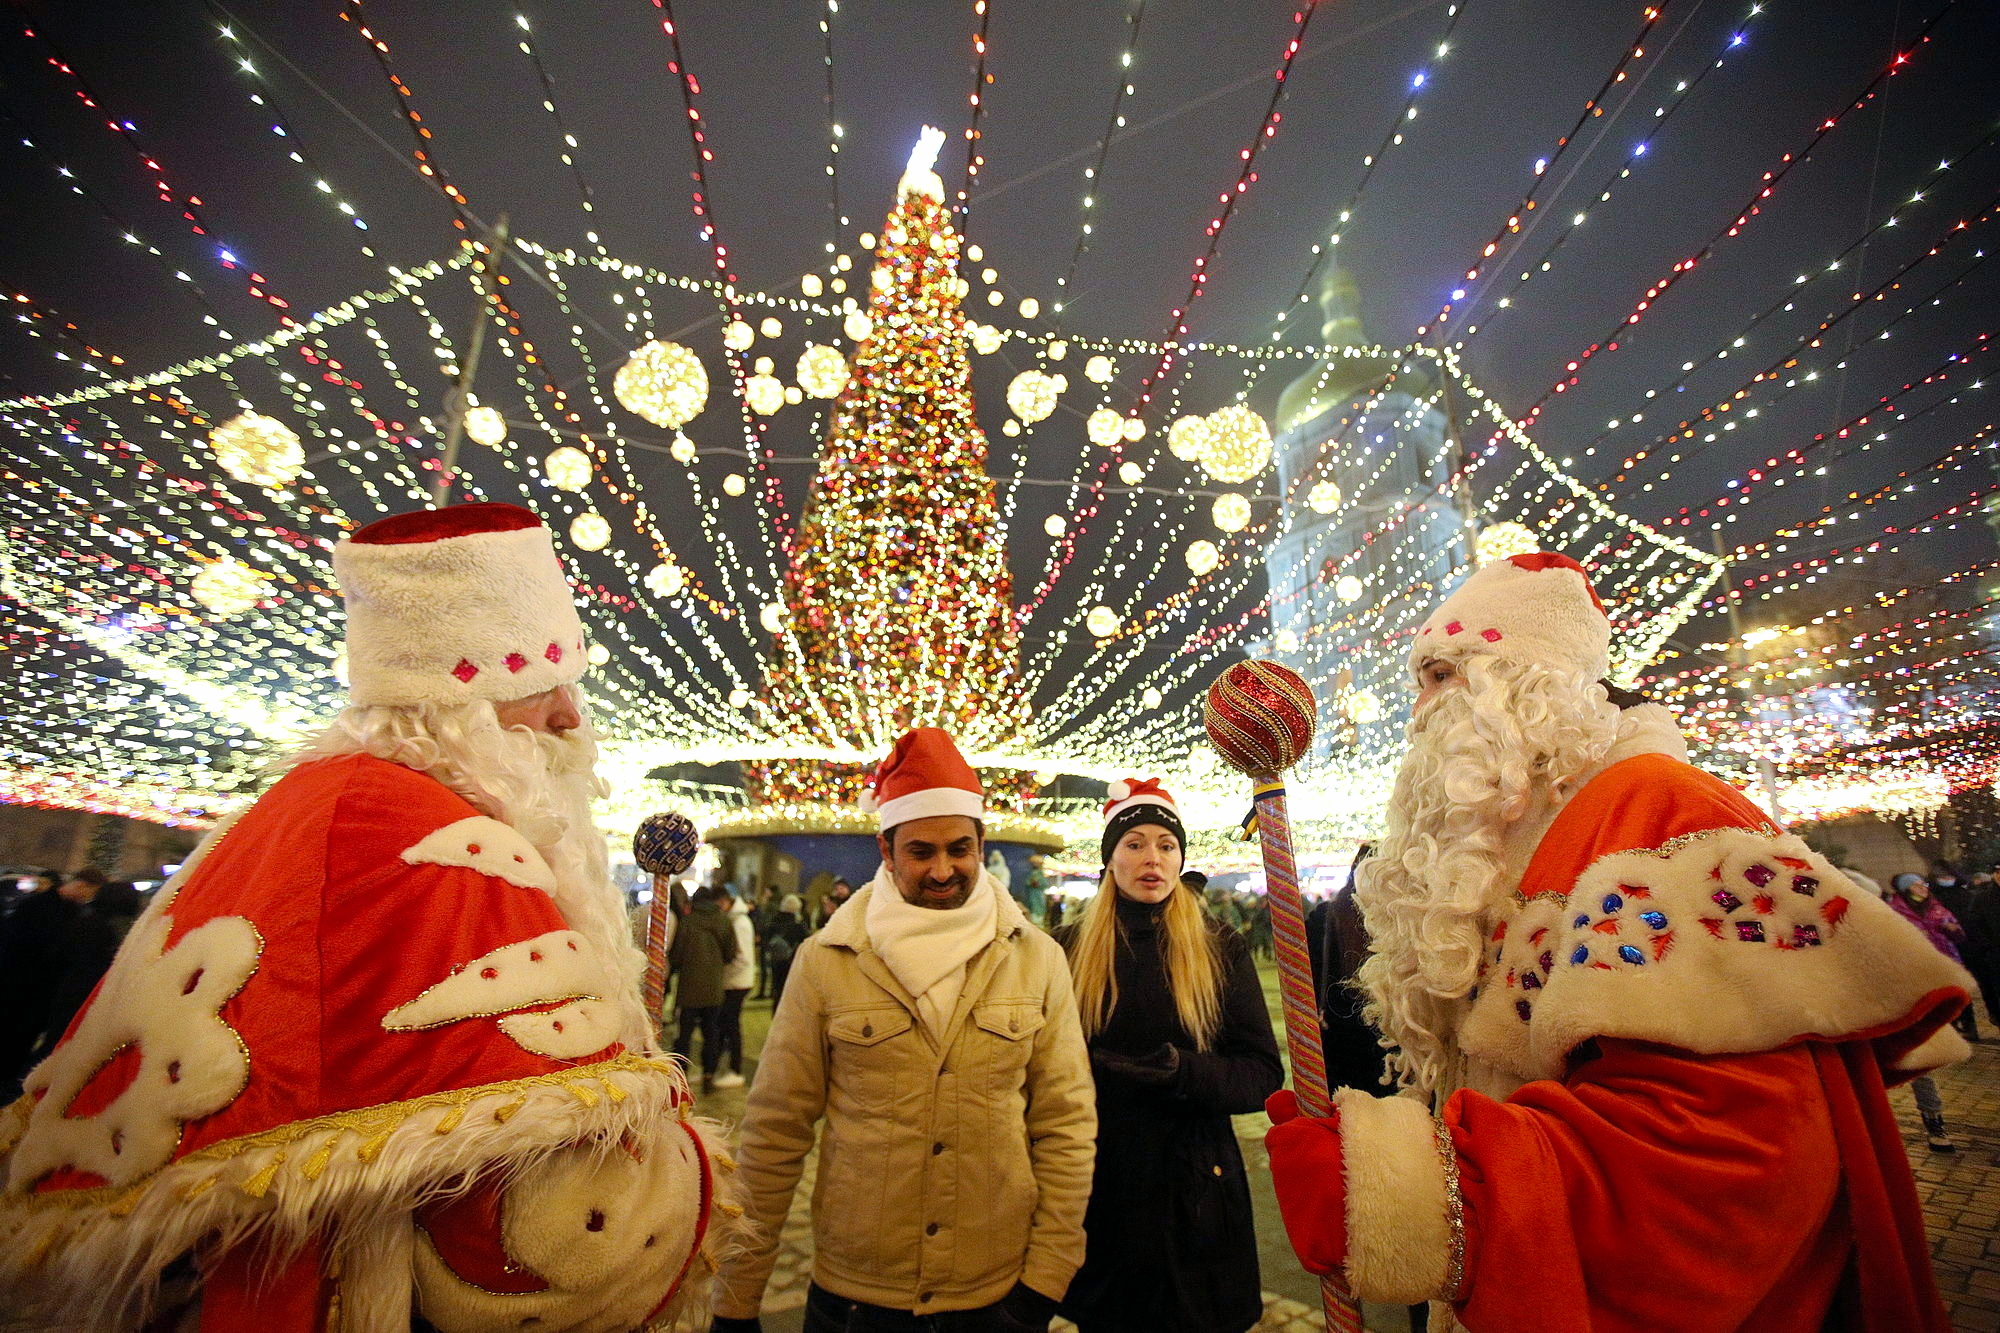 Kyiv’s colorful, crowded Christmas markets in 10 best photos